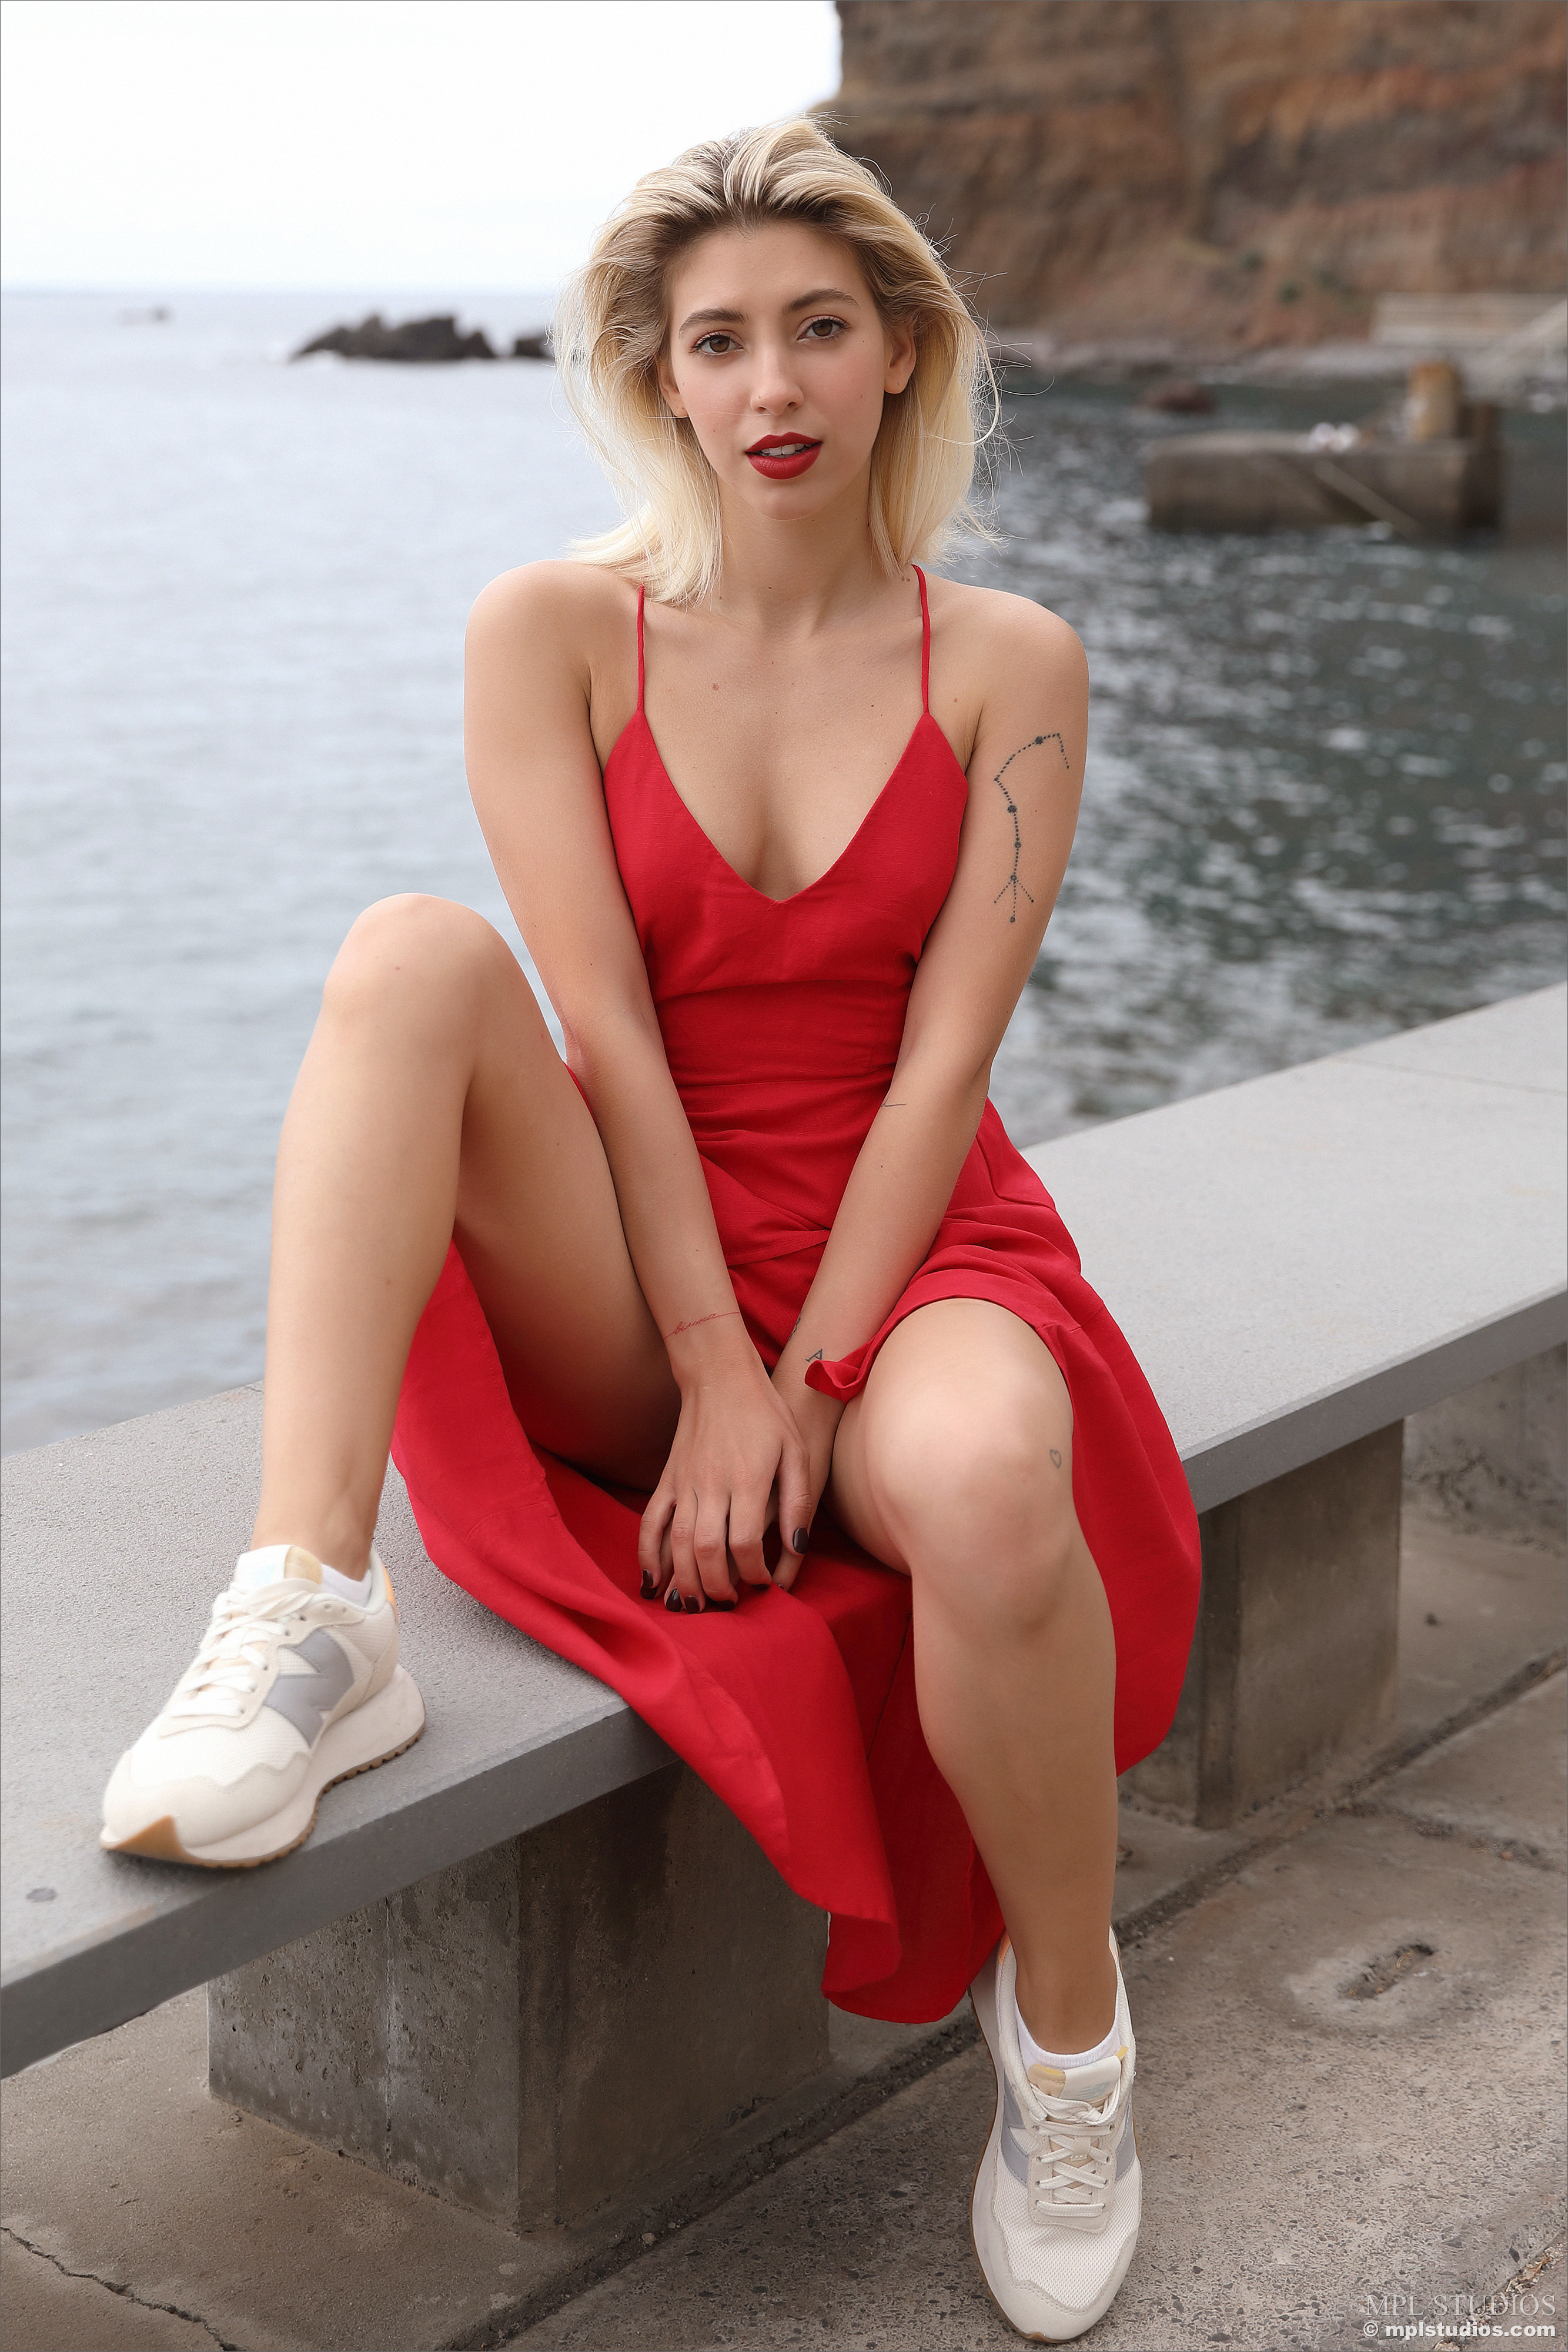 People 2667x4000 Avery MPL Studios blonde women outdoors model dress shoes looking at viewer portrait display tattoo bare shoulders sitting strategic covering red lipstick women sneakers New Balance watermarked Ukrainian